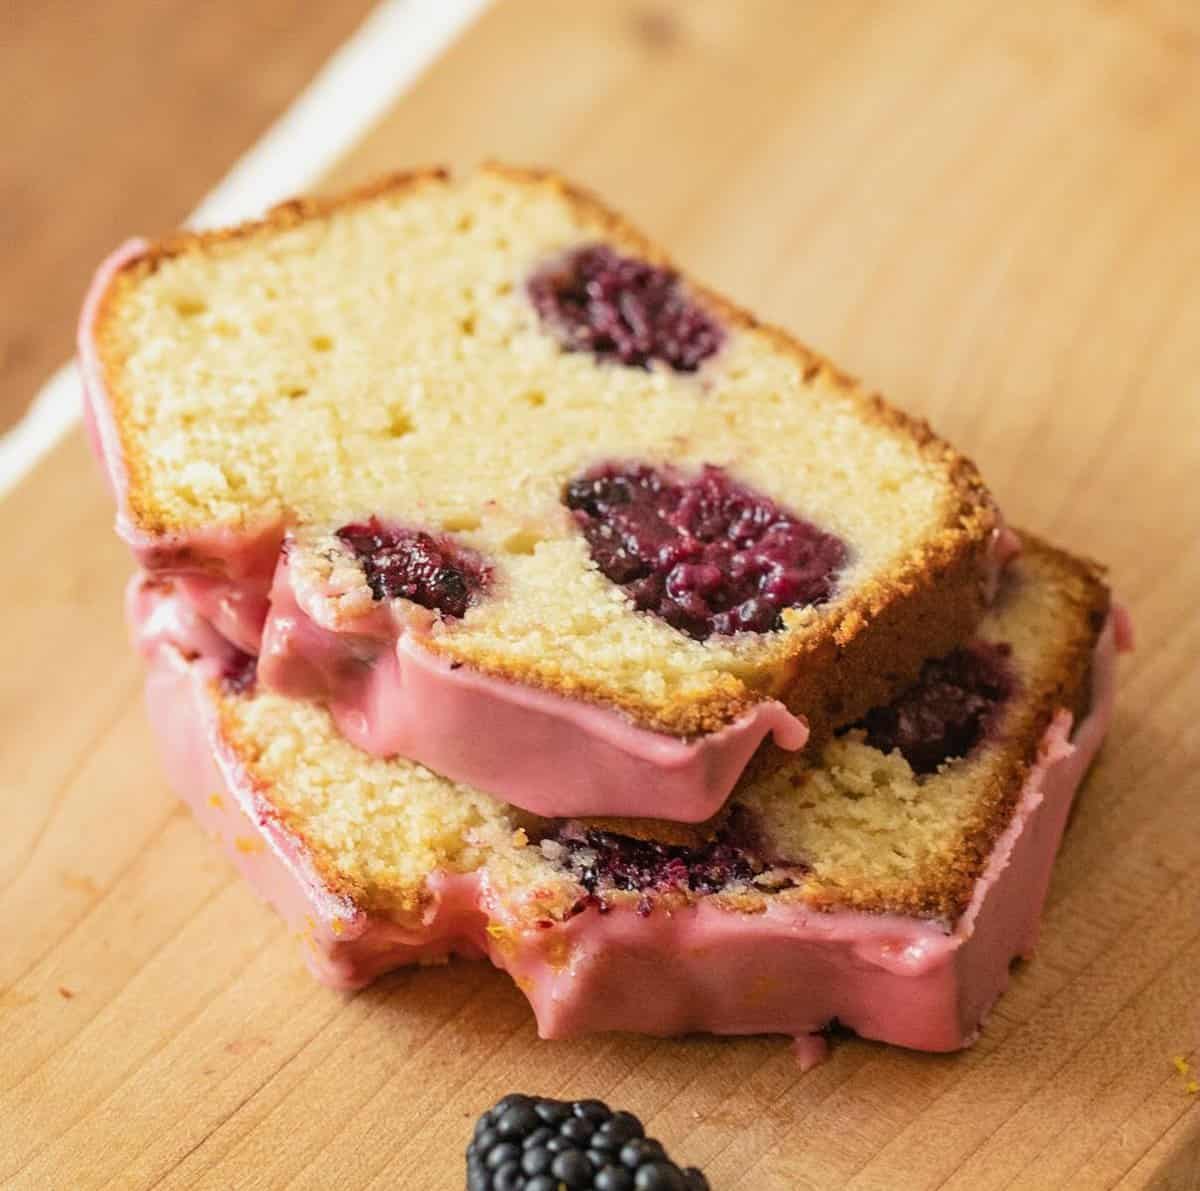 Two slices of blackberry bread with pink glaze on wooden board.